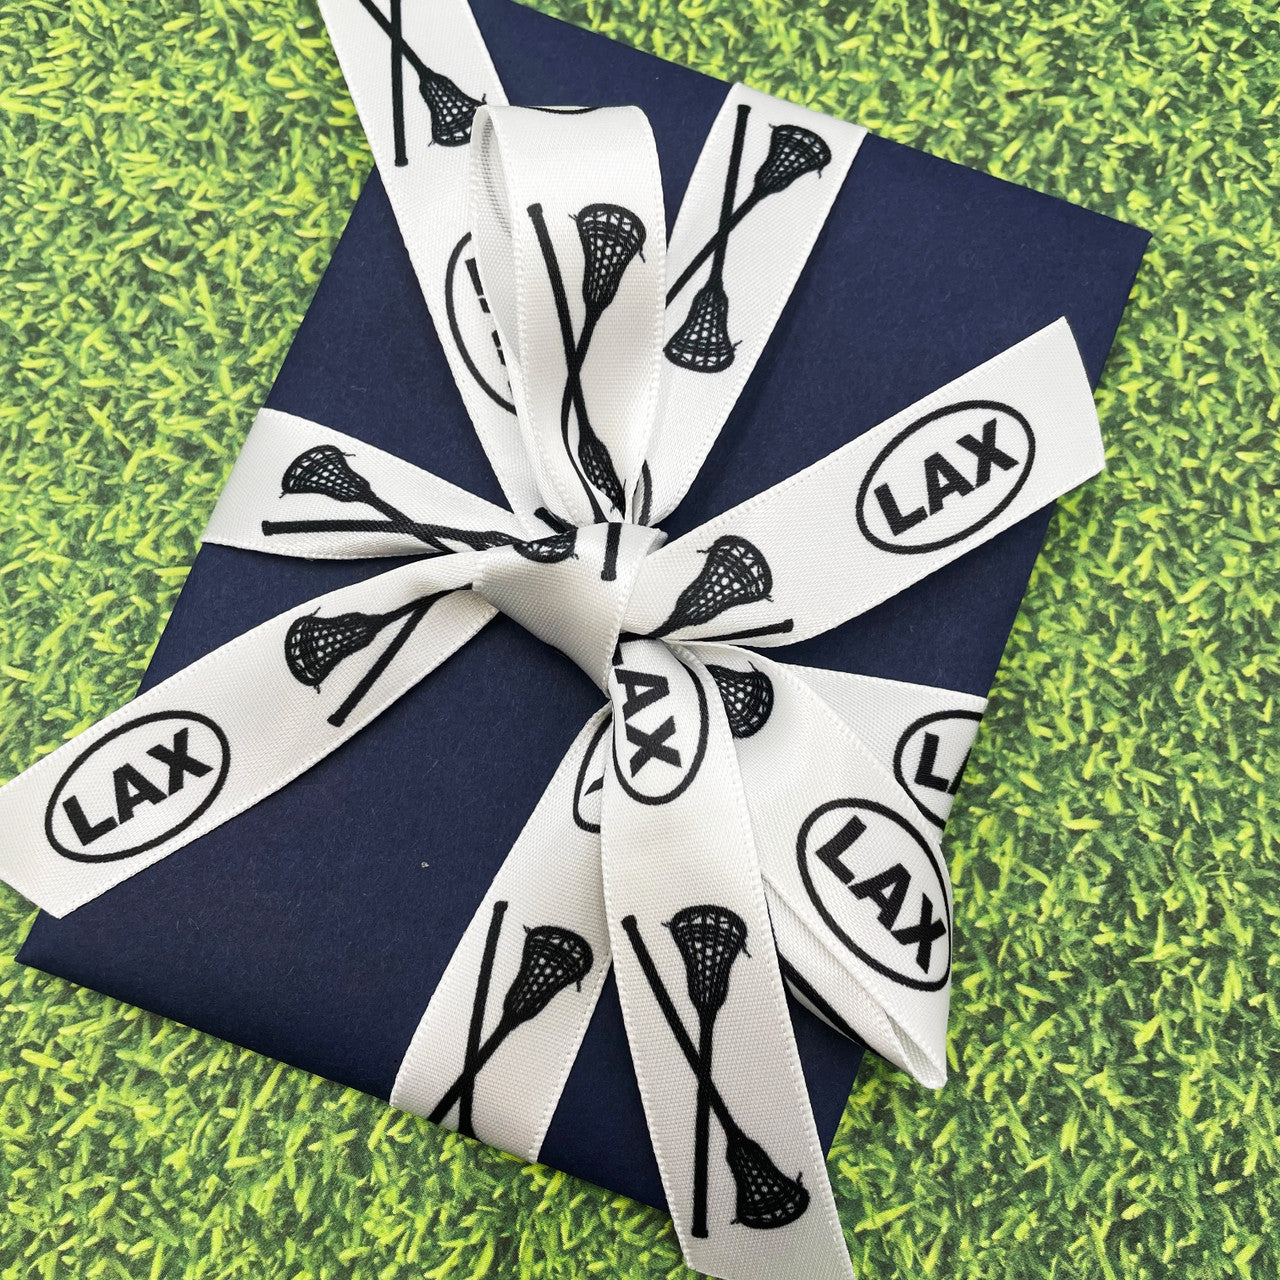 Celebrate your La Cross player with a fun little gift tied with our ribbon! 